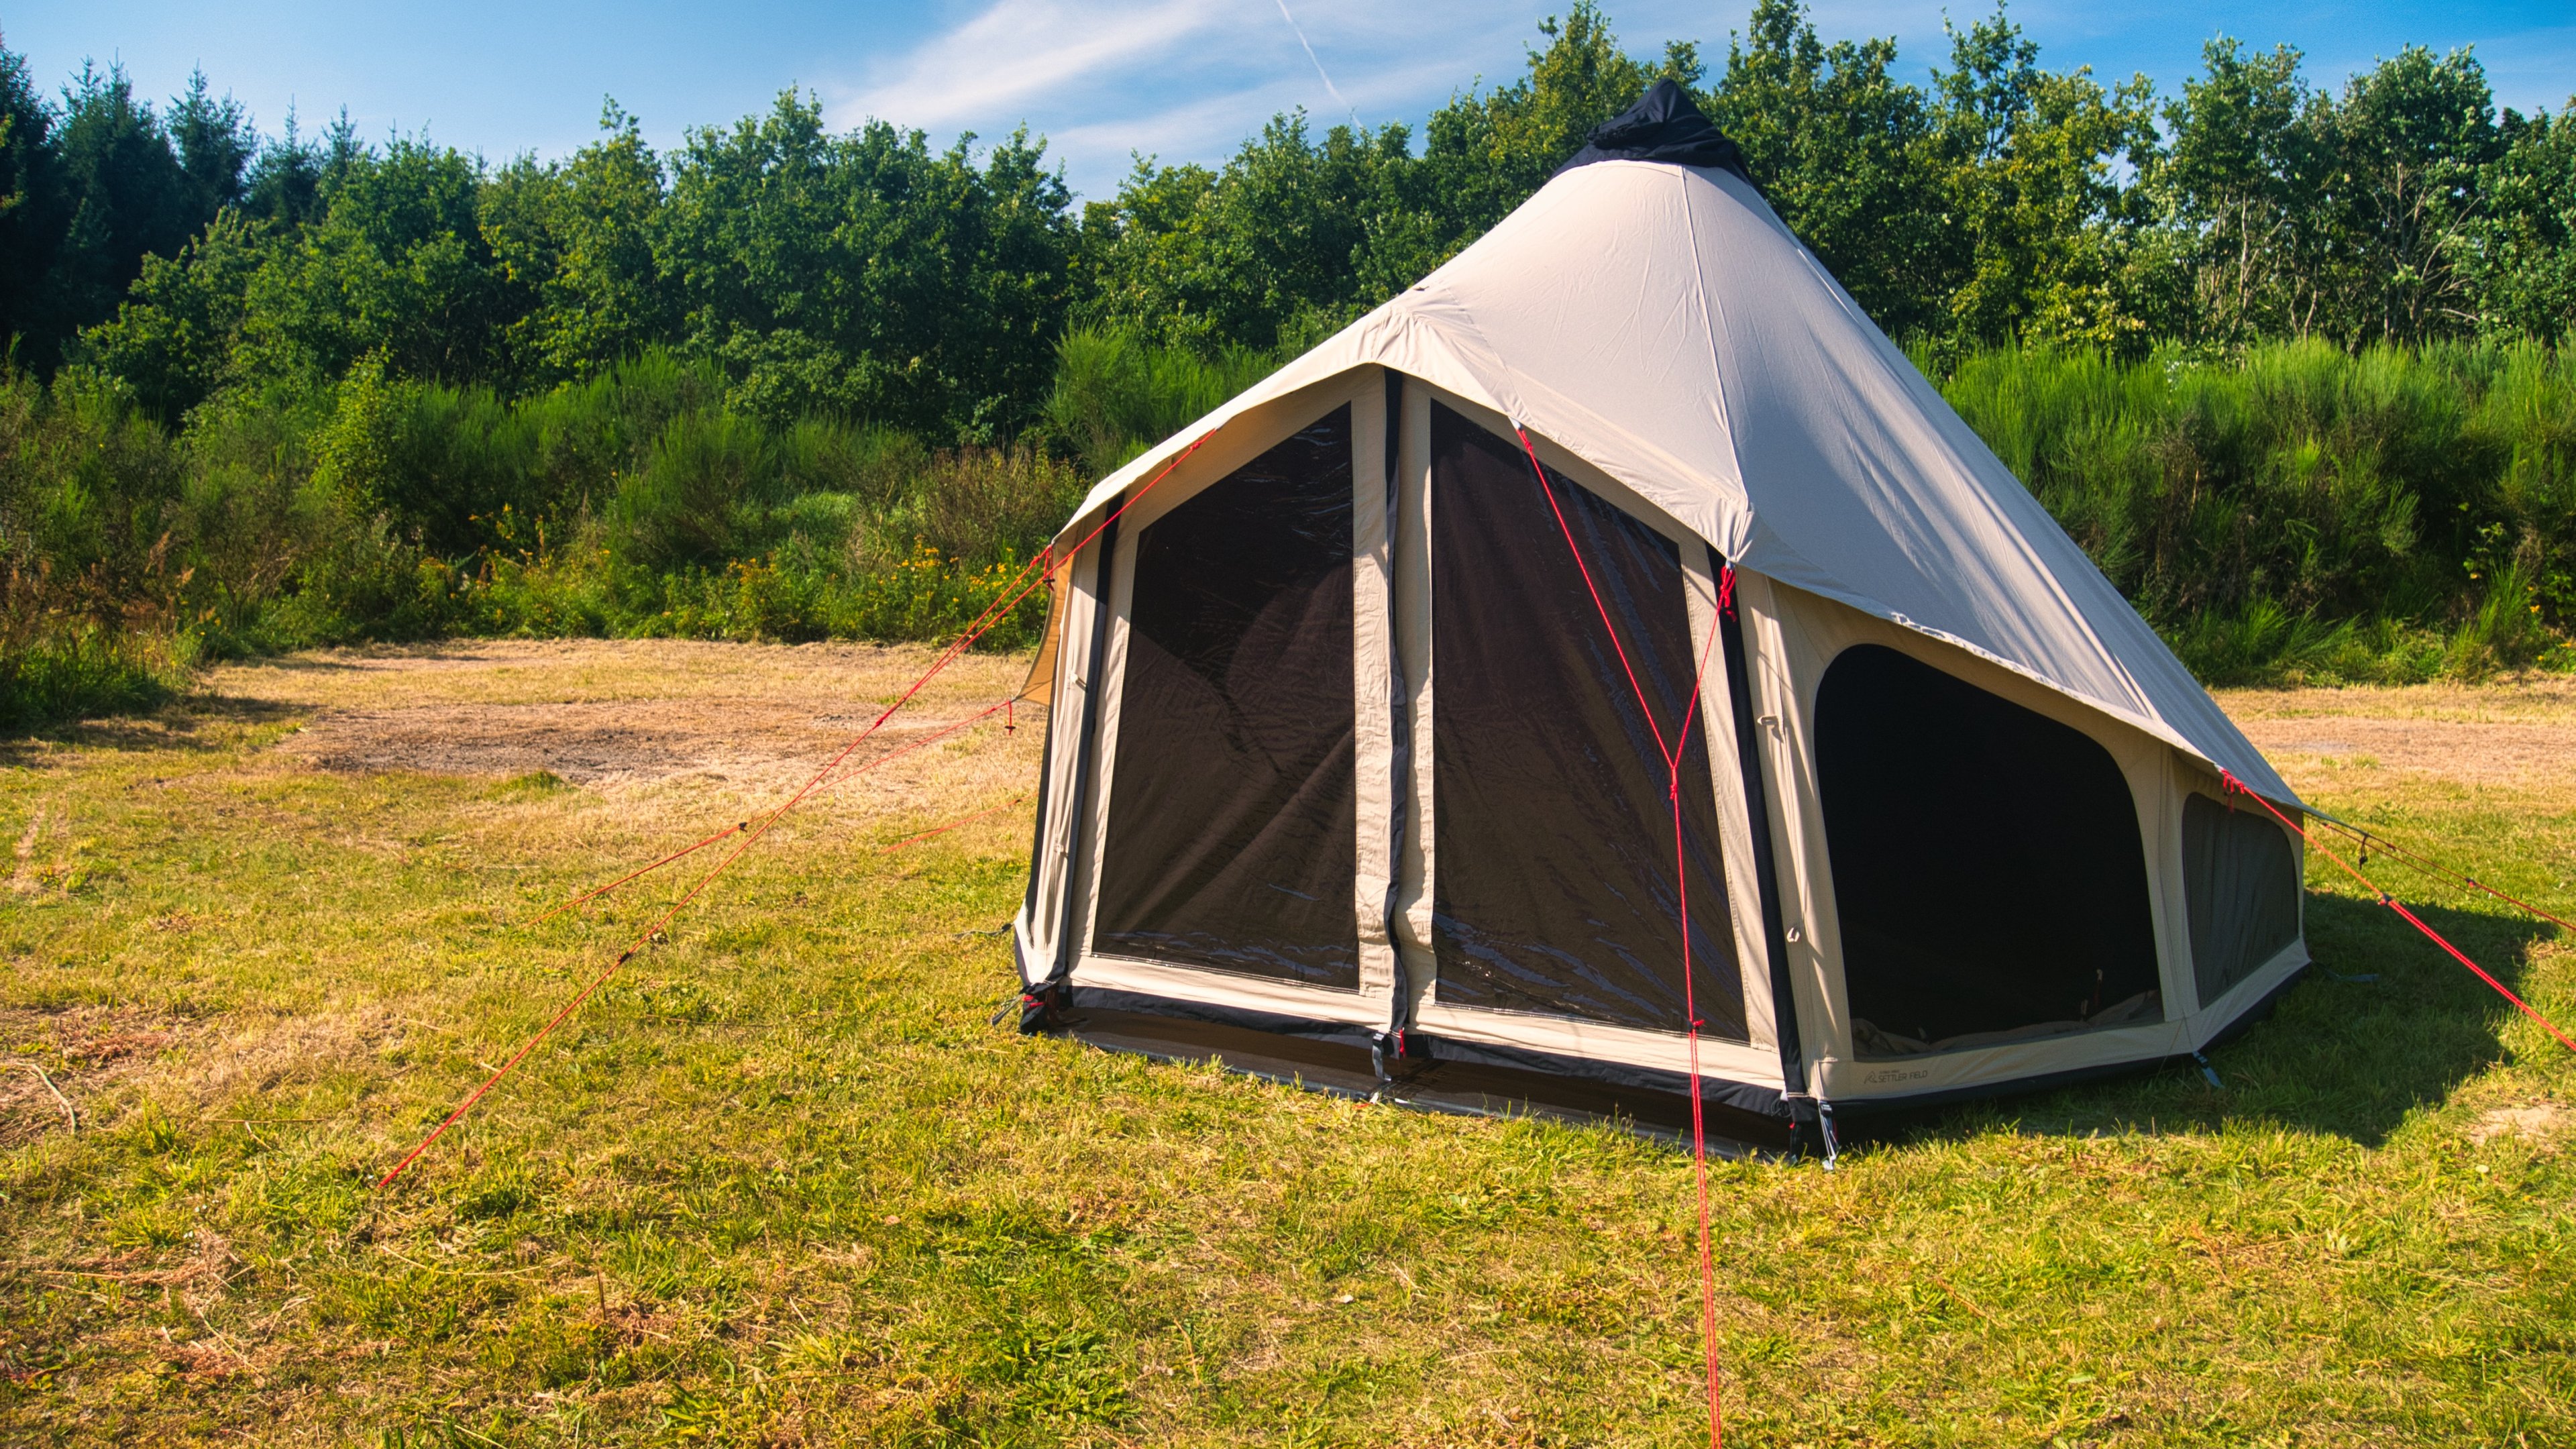 The Robens Settler Field tent pitched in a field